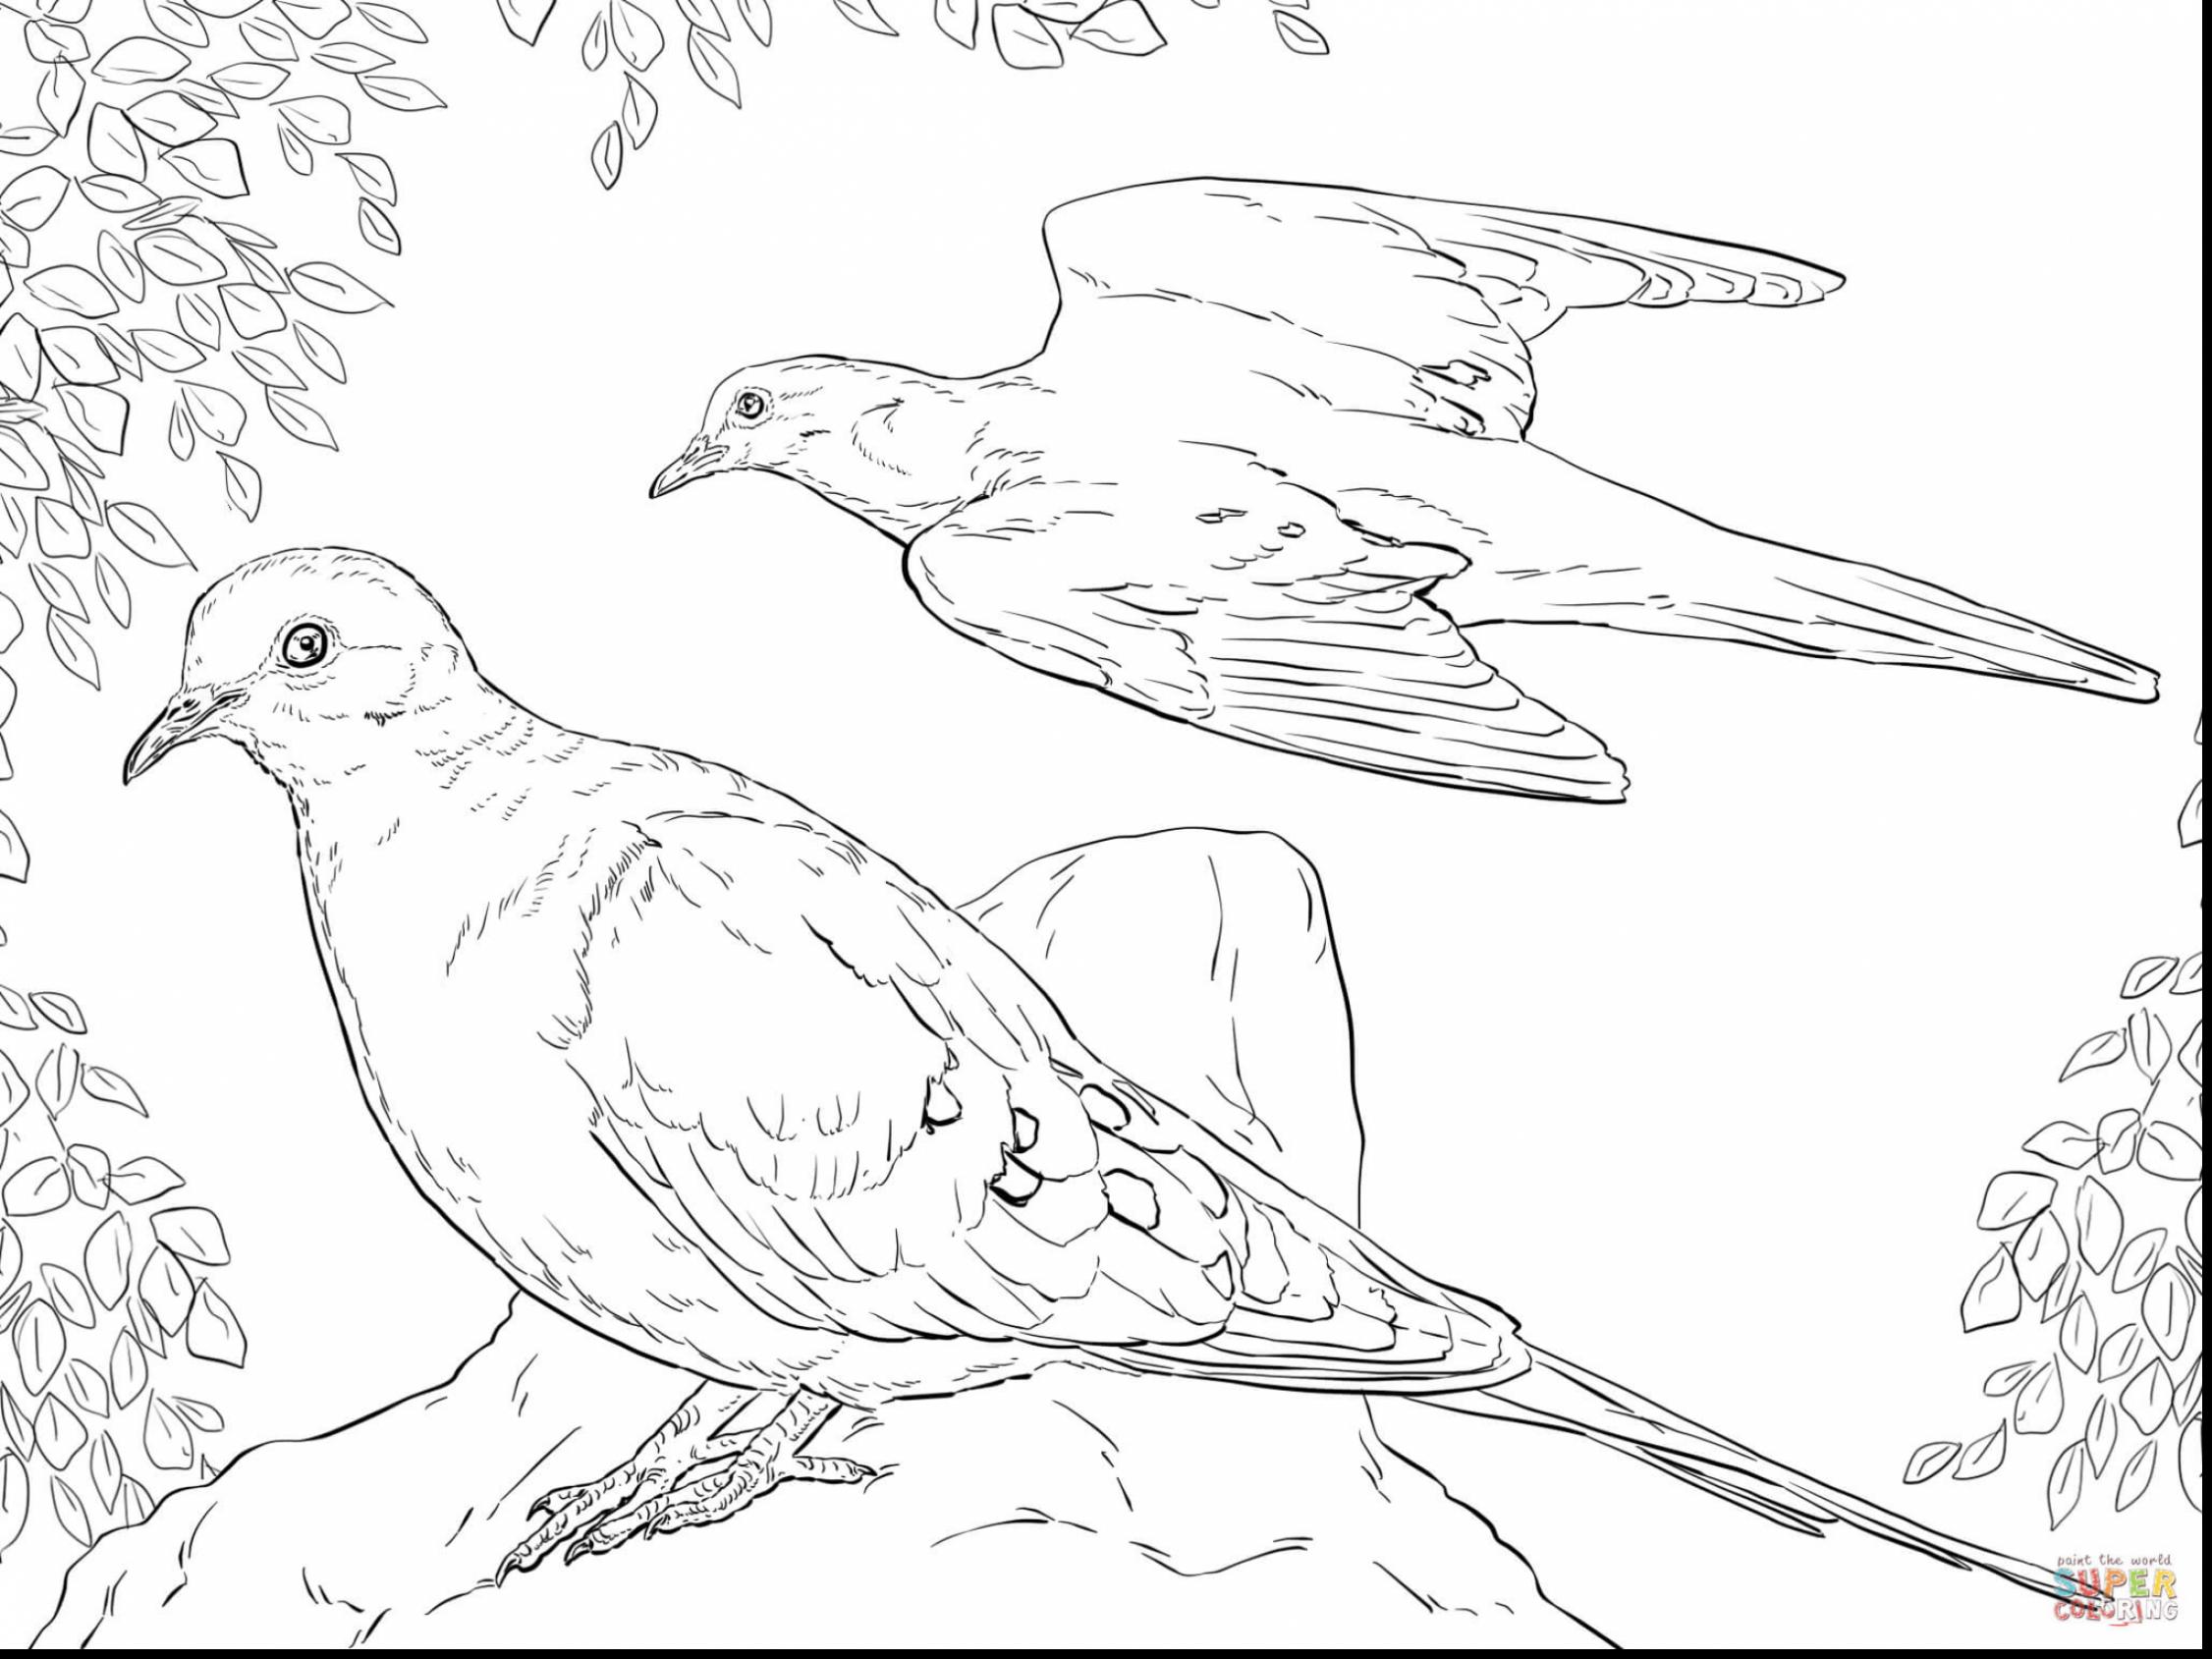 Mourning Dove coloring #1, Download drawings